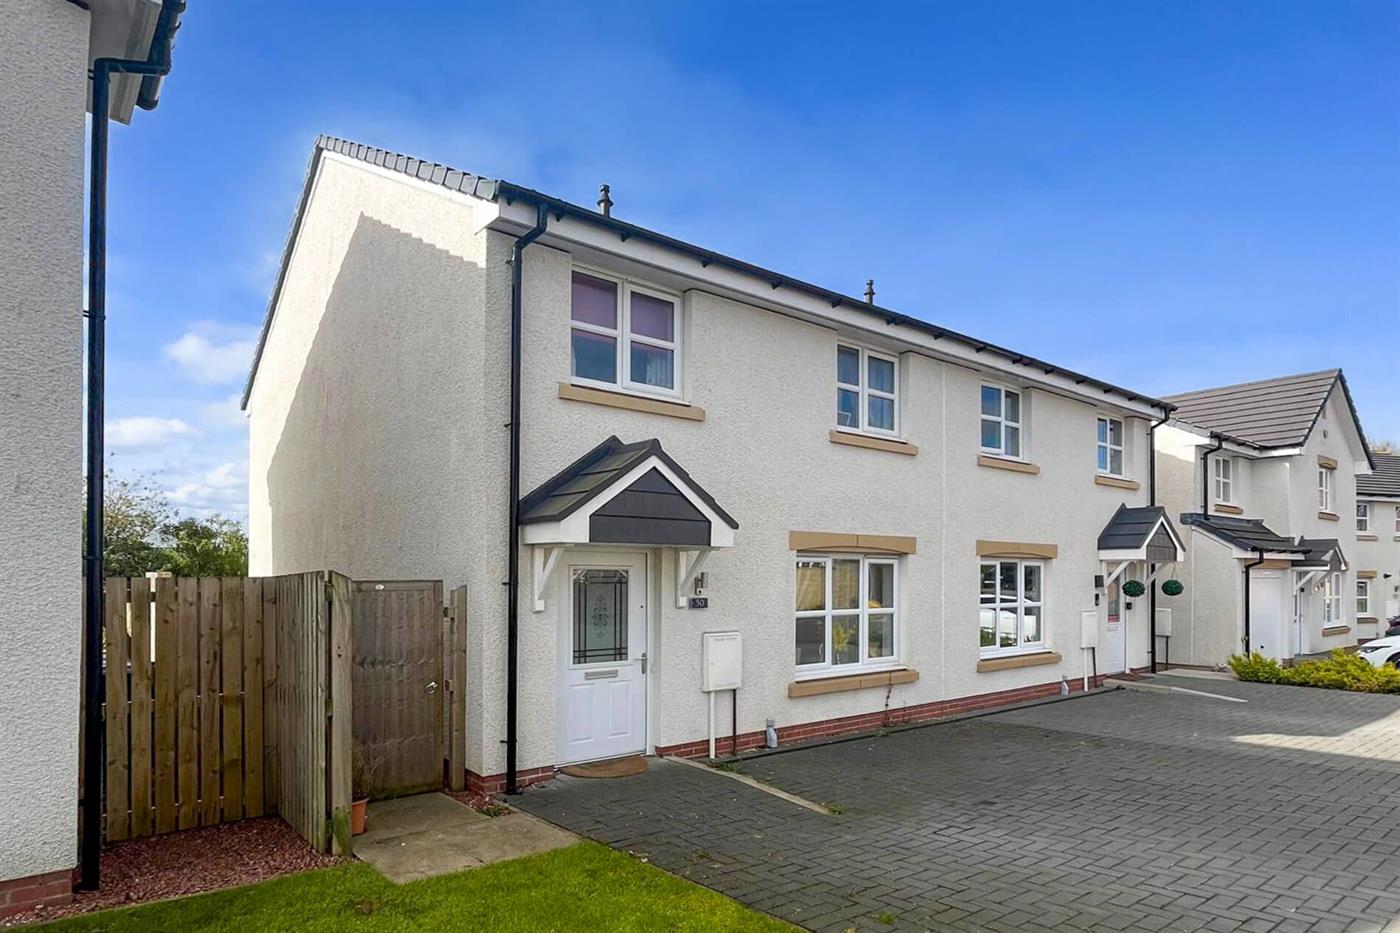 3 Bedroom Semi-Detached House for Sale: Queen Mary Crescent, Clydebank, G81 2AB